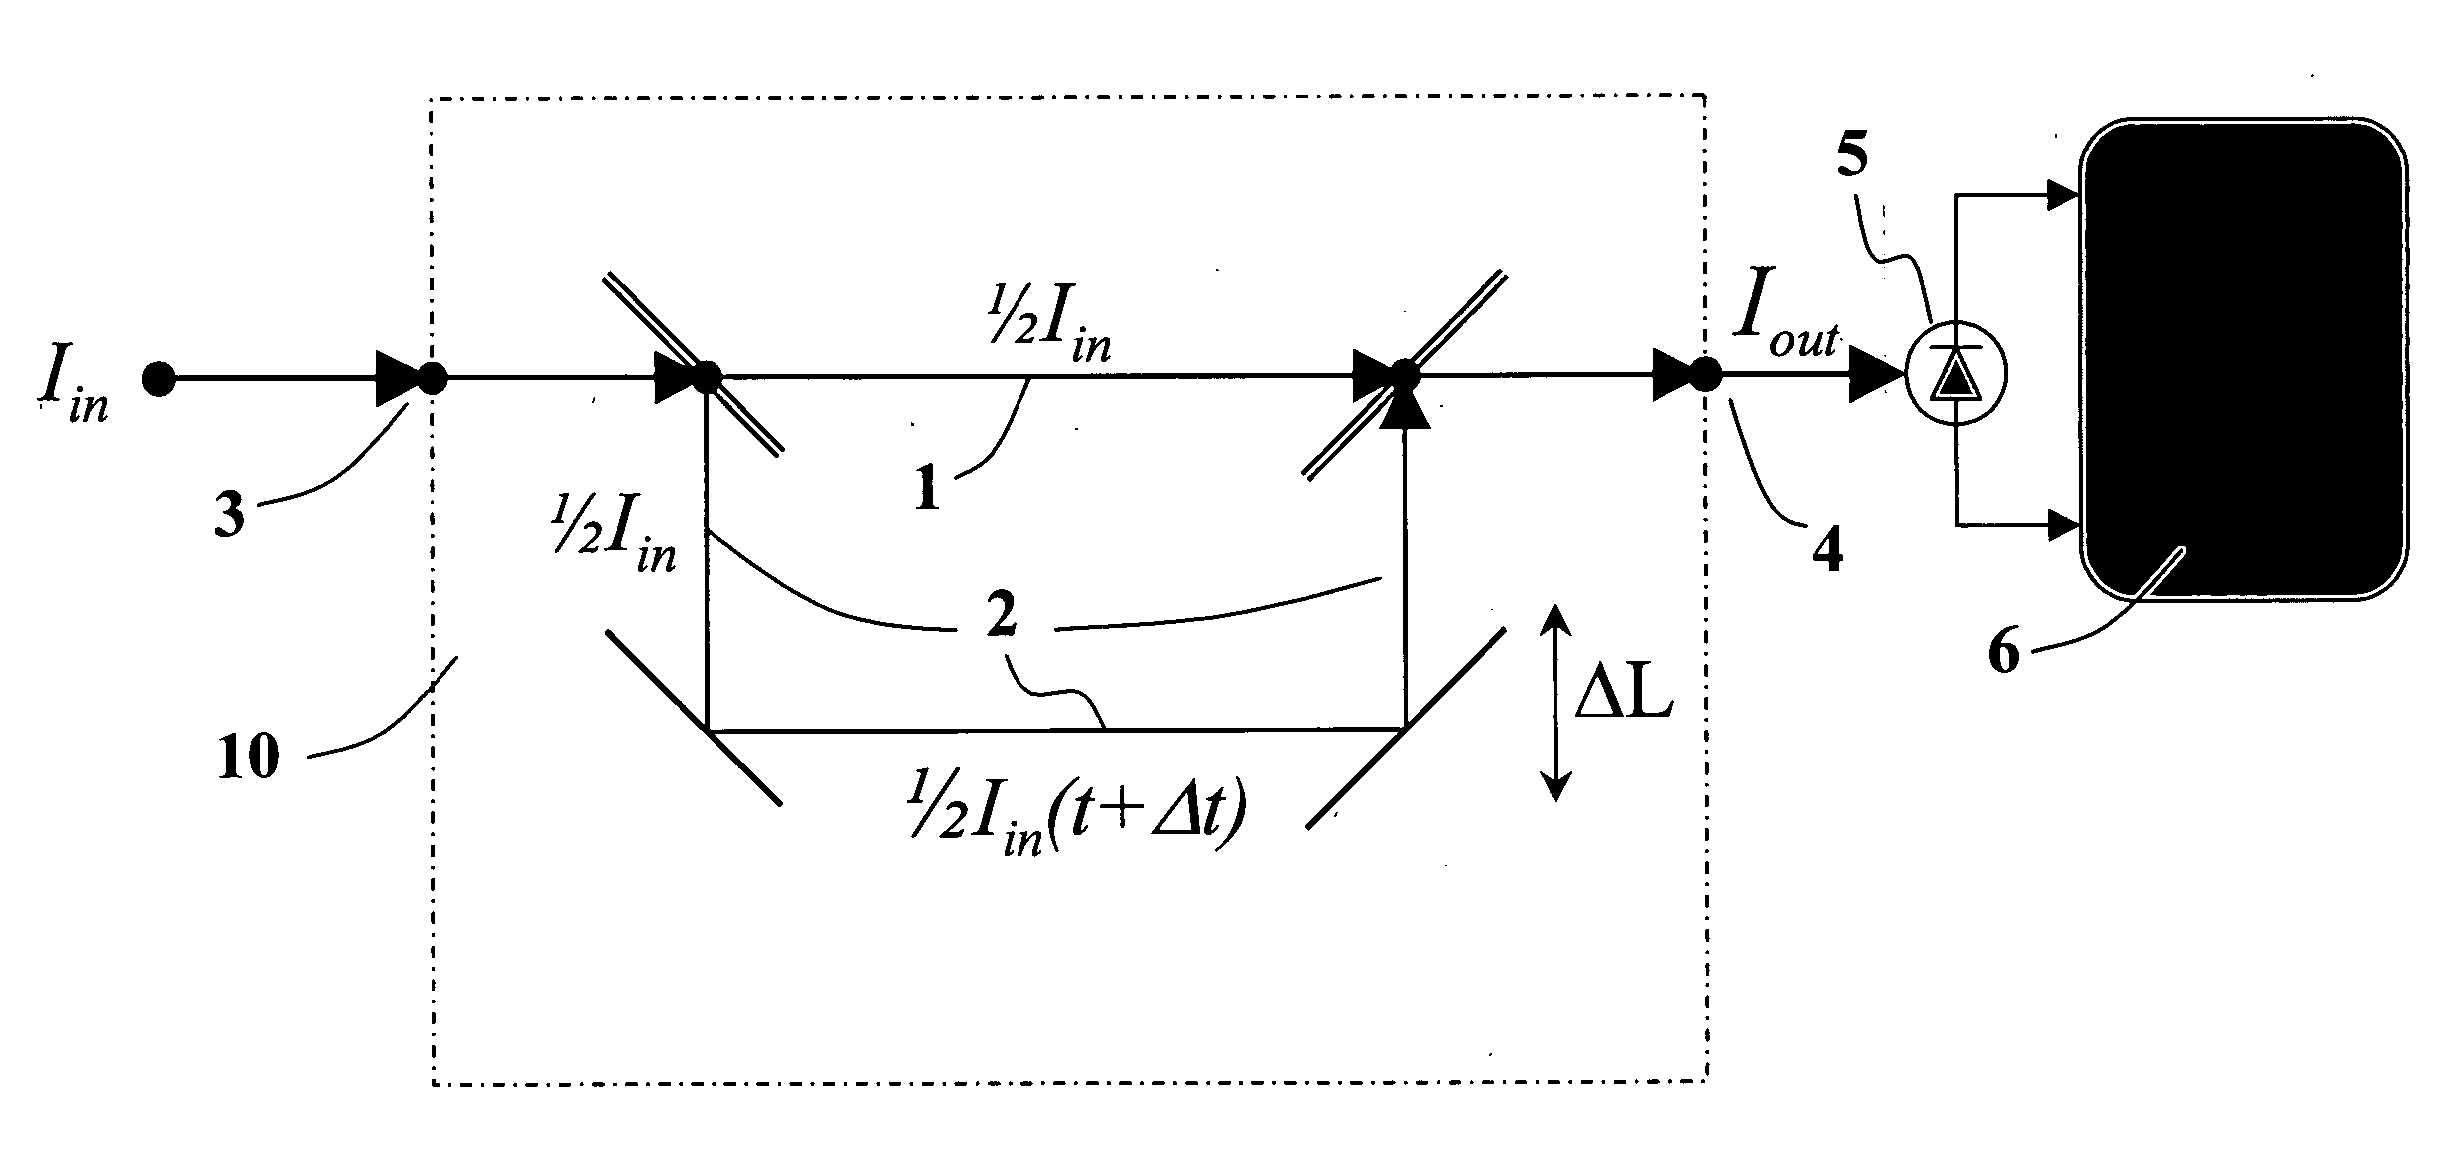 Apparatus and method for characterizing pulsed optical signals